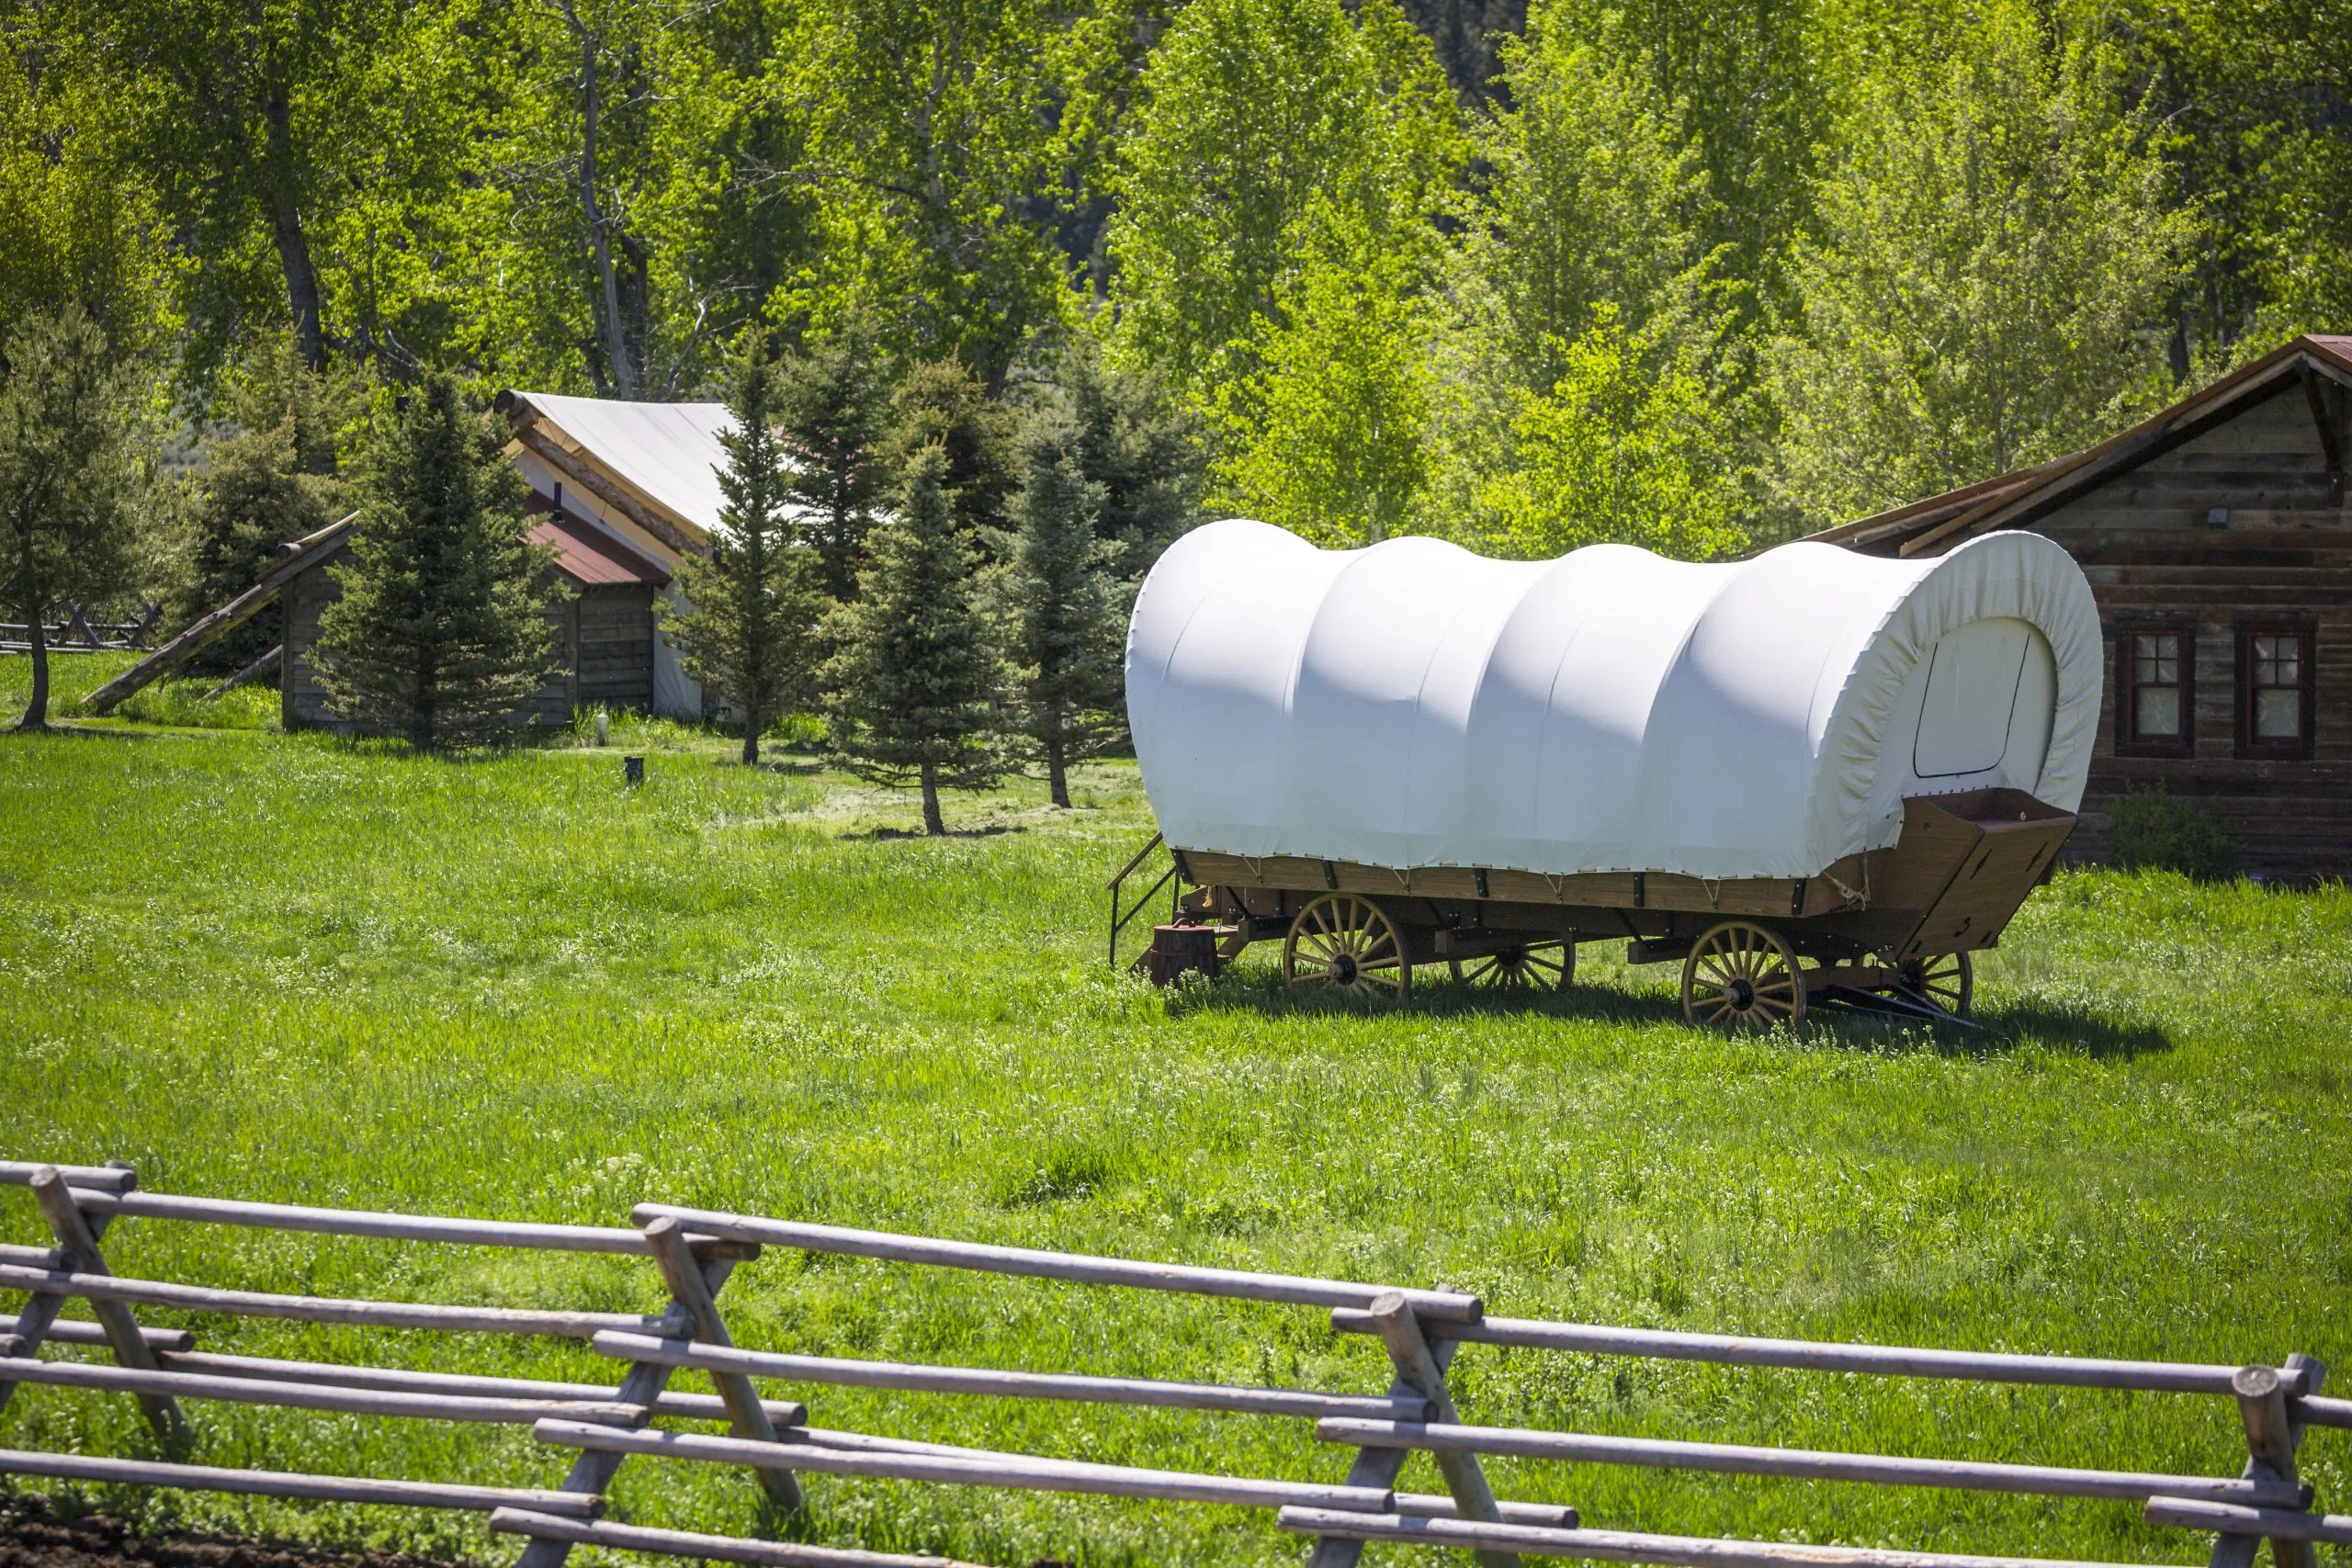 Covered wagon out in the field located next to two cabins and a fence